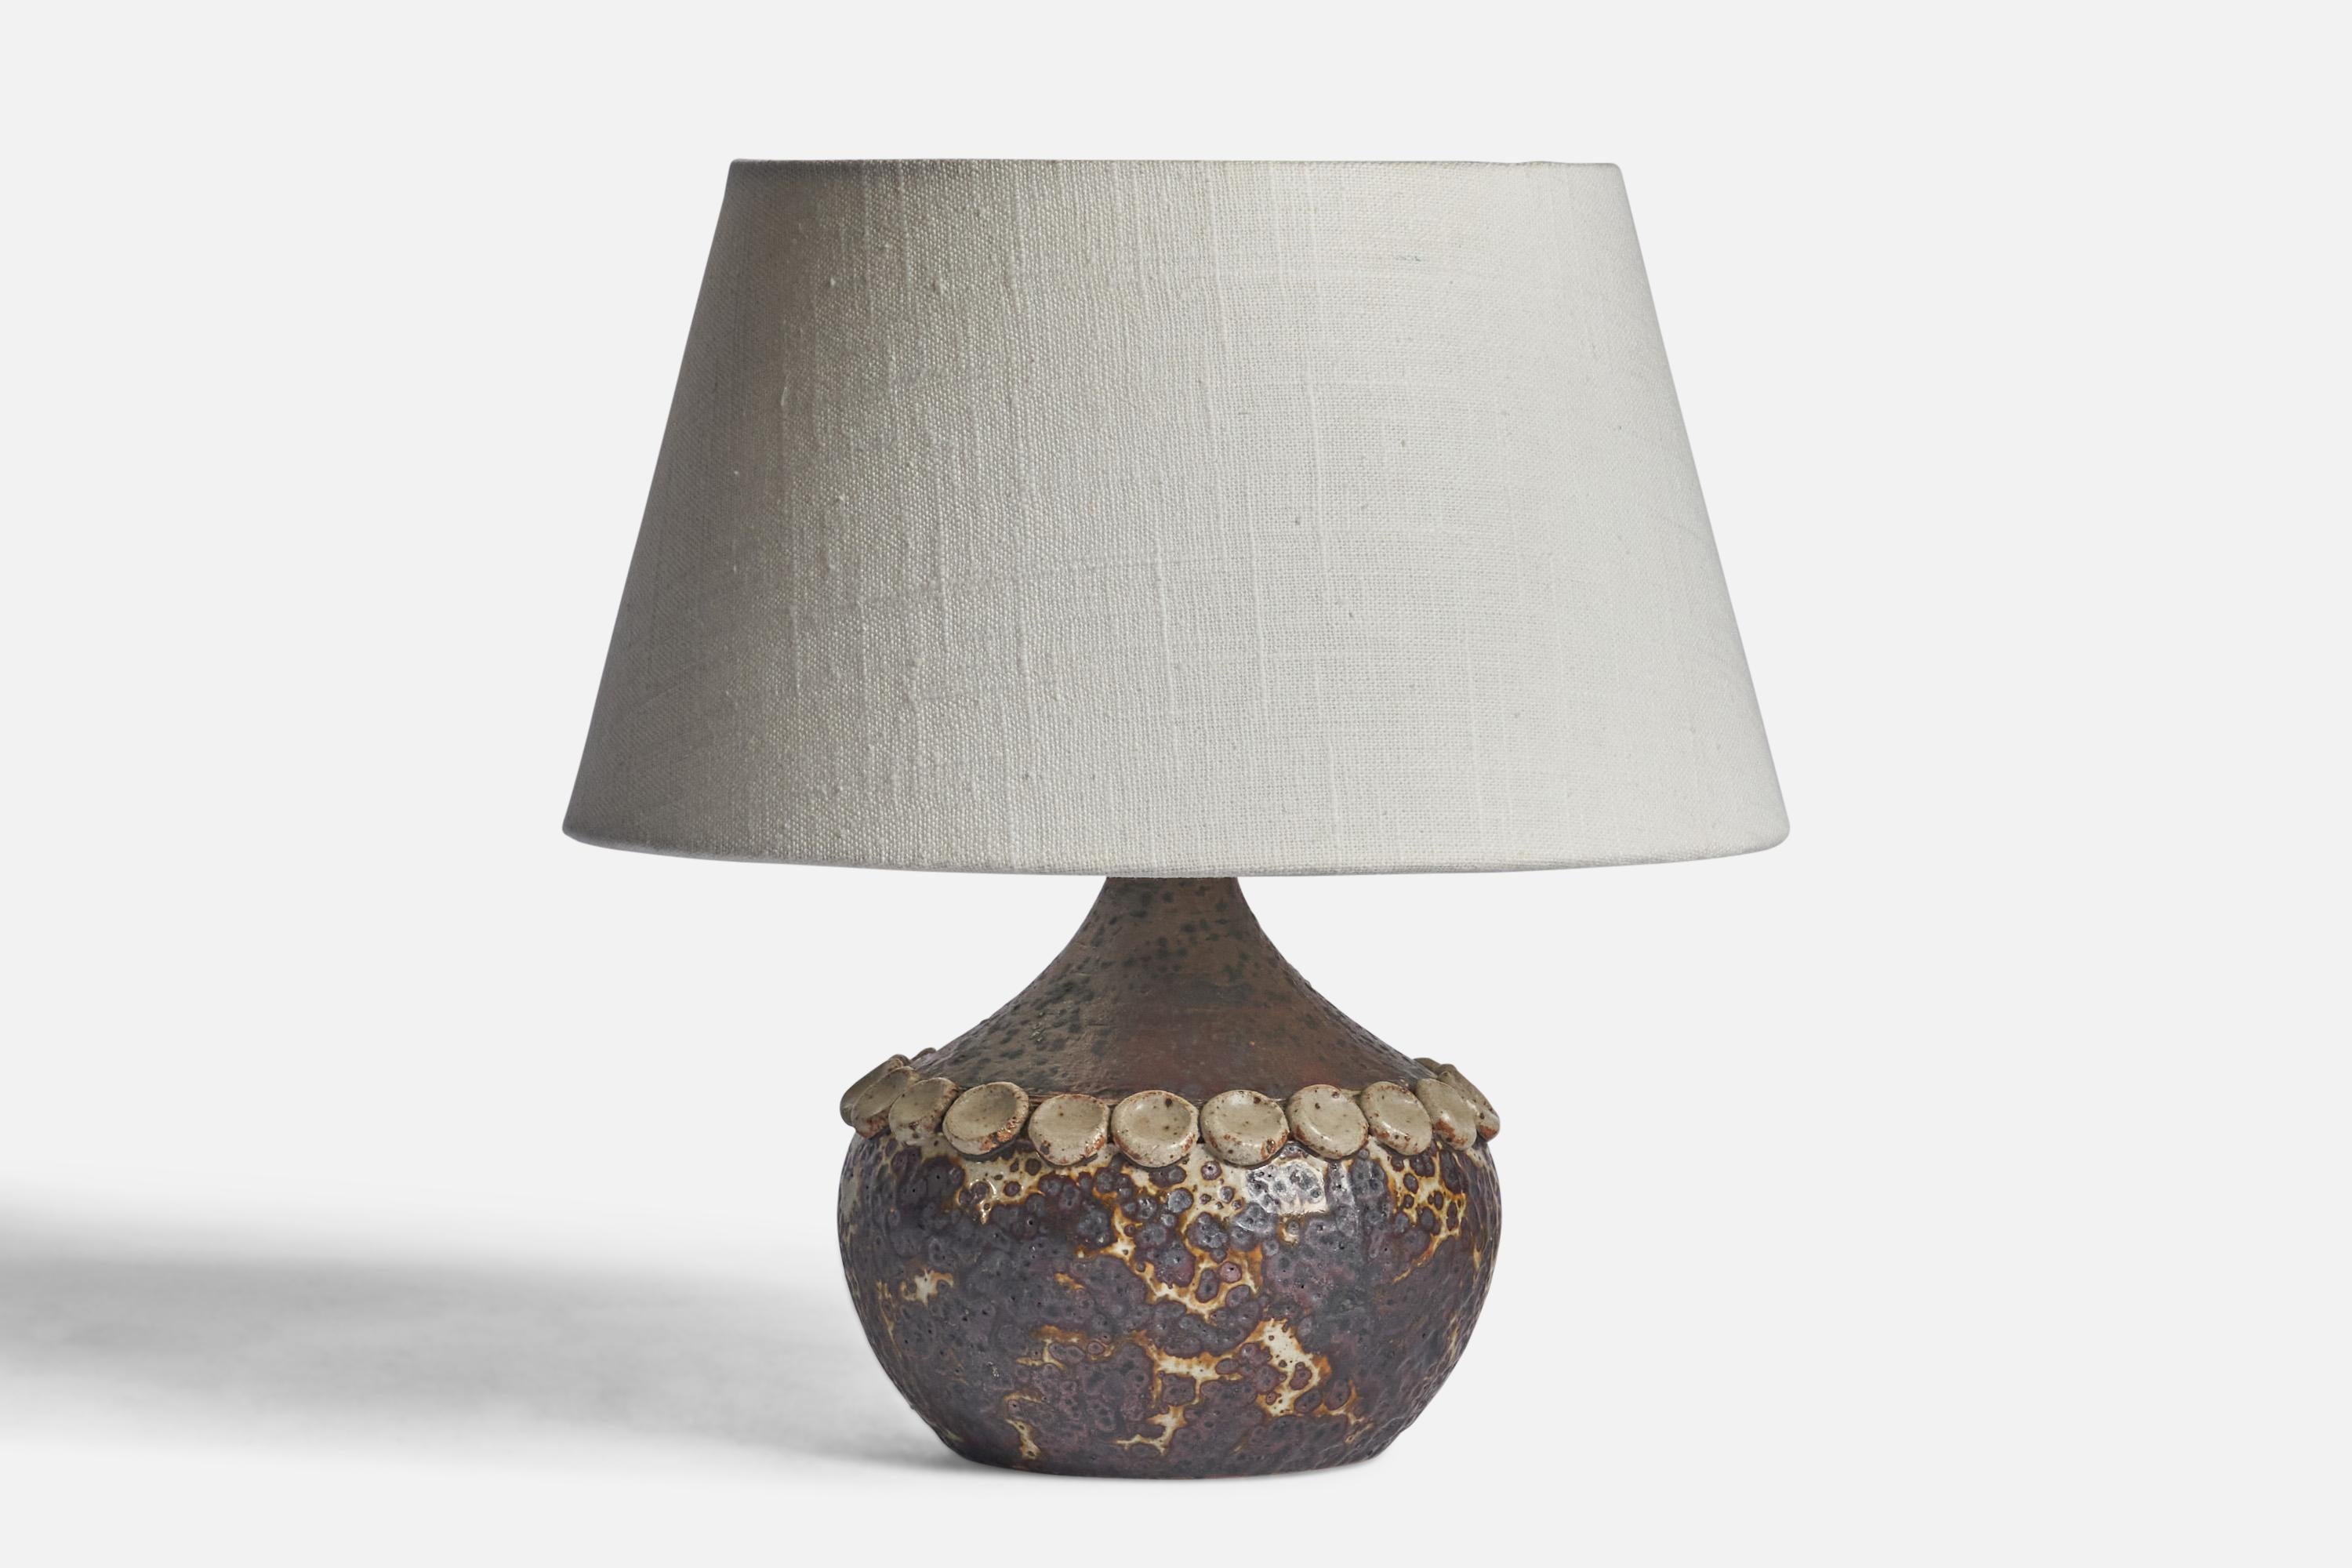 A grey and brown-glazed stoneware table lamp designed and produced by Claes Thell, Sweden, c. 1970s.

Dimensions of Lamp (inches): 7.25” H x 5.75” Diameter
Dimensions of Shade (inches): 7” Top Diameter x 10” Bottom Diameter x 5.5” H 
Dimensions of